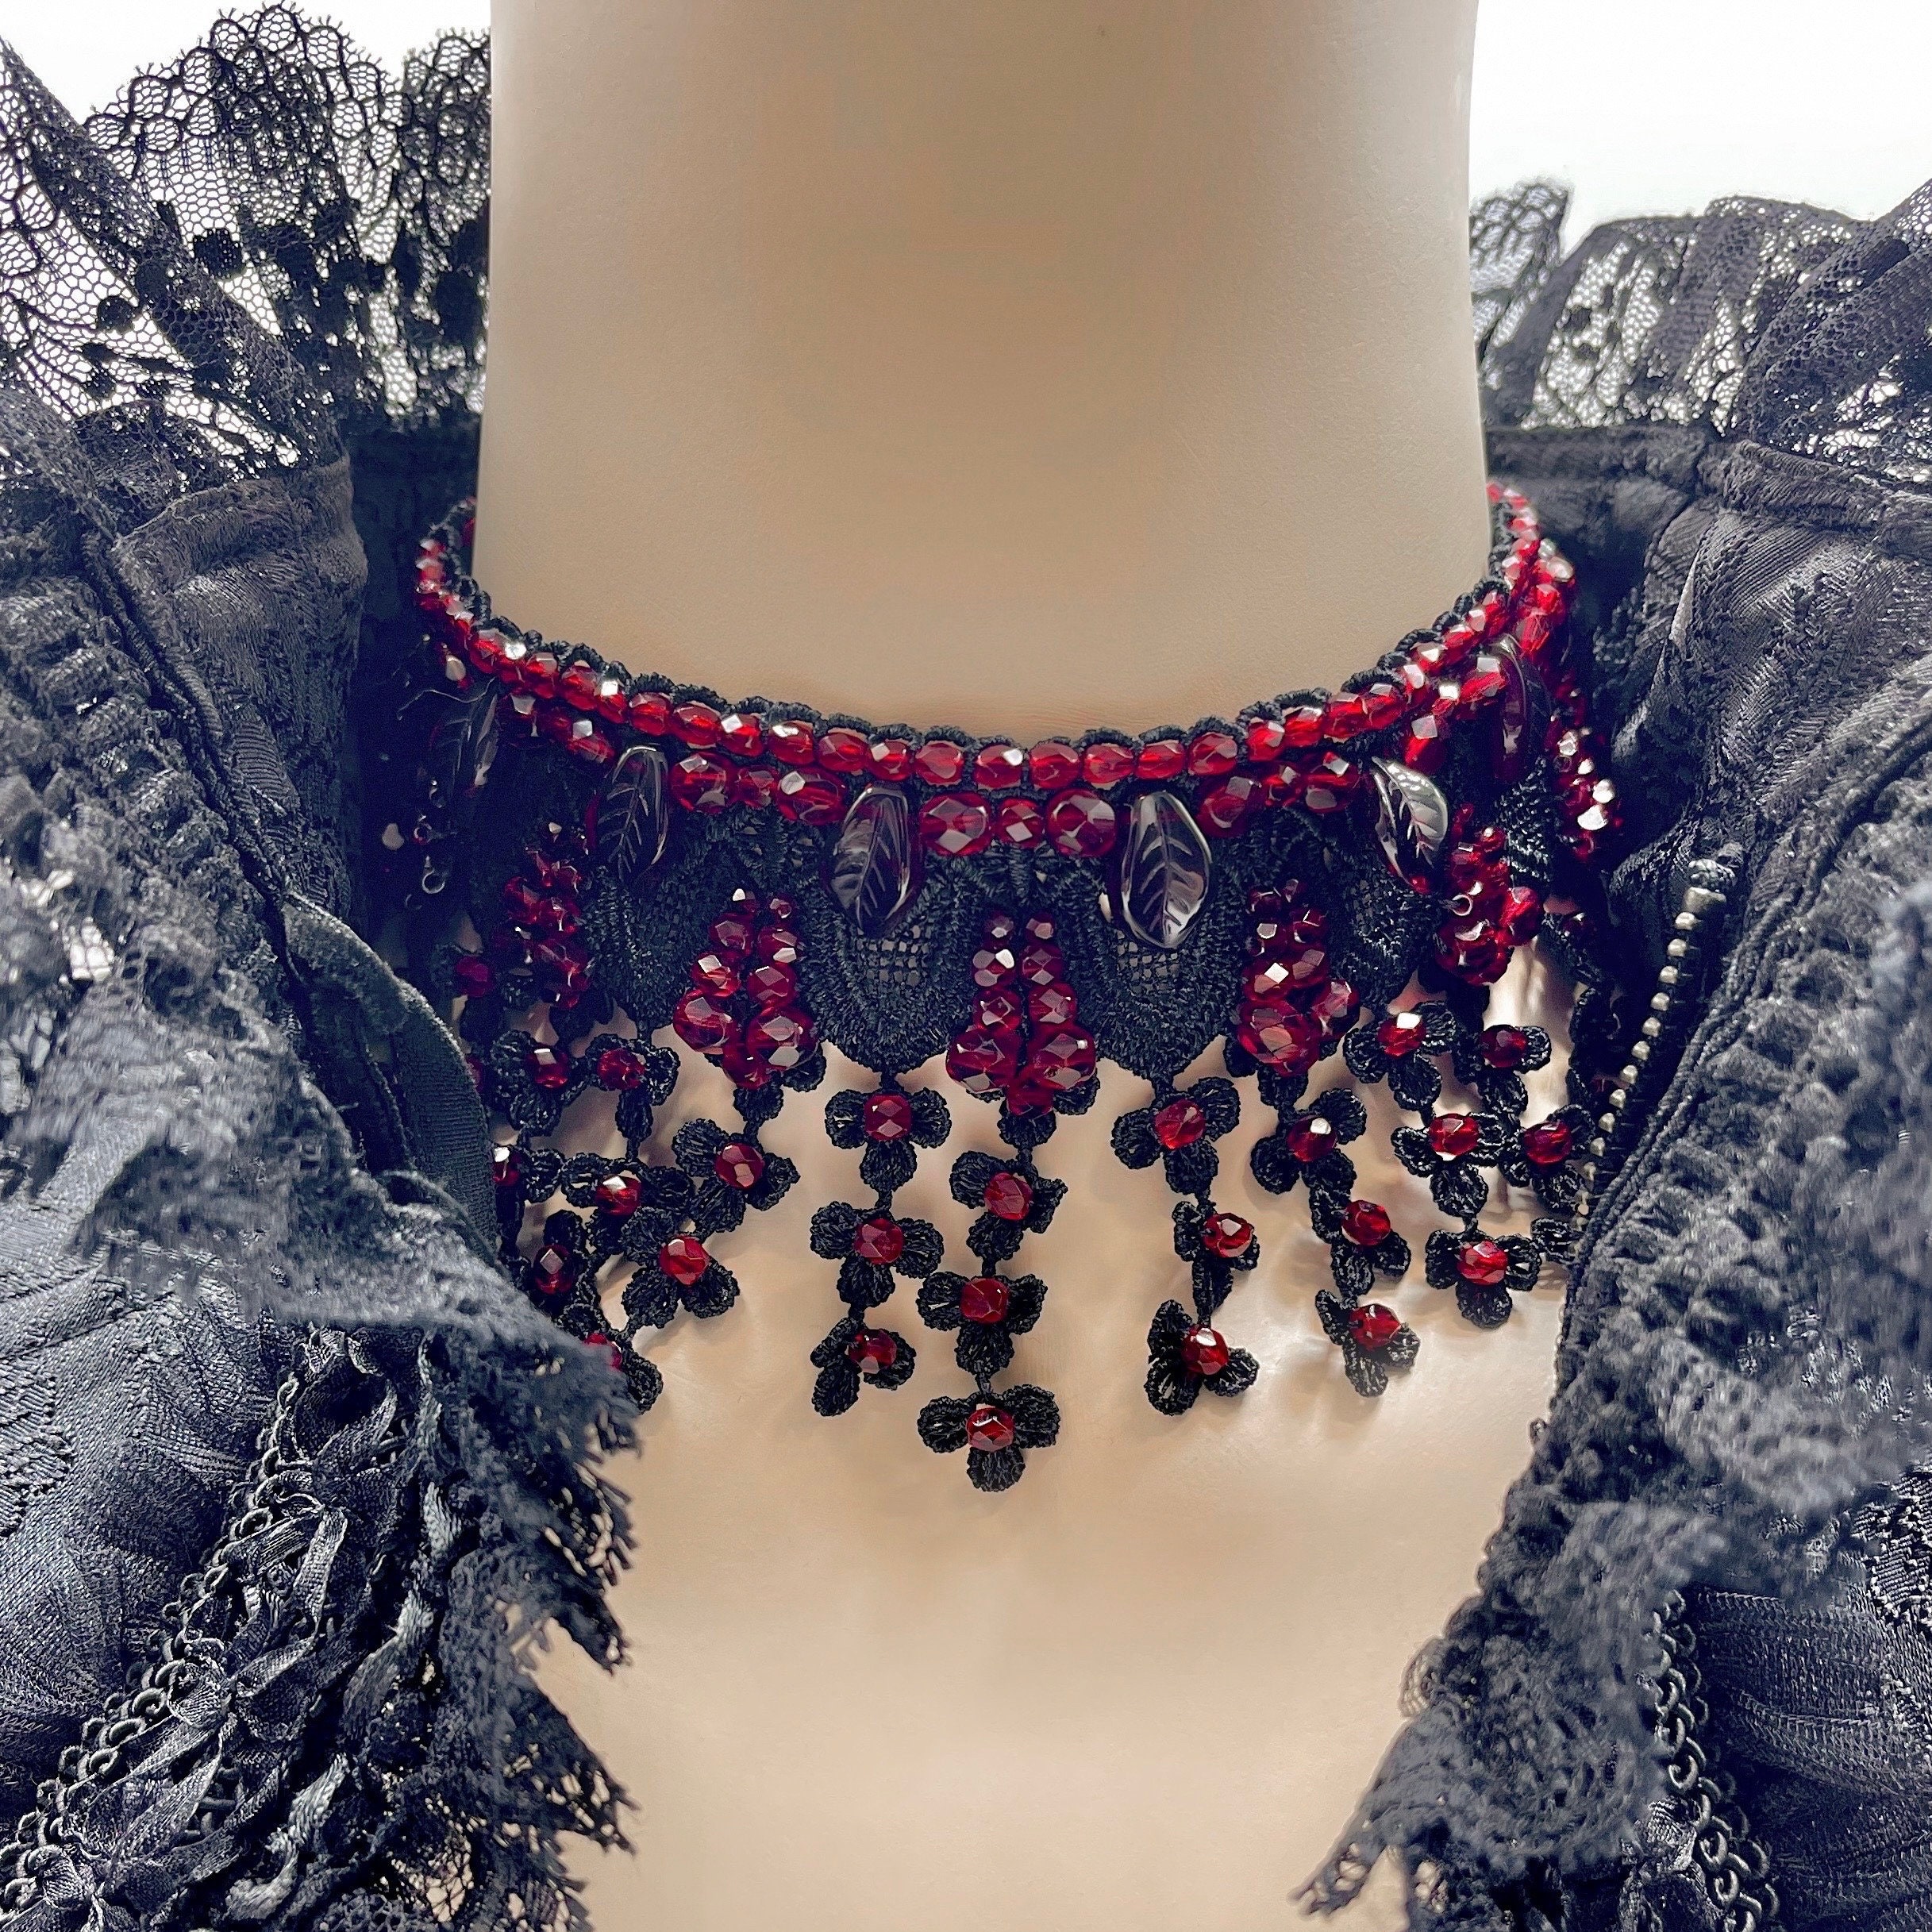 Handmade Black Beaded Gothic Emo Lace Choker Necklace By The Colourful Aura